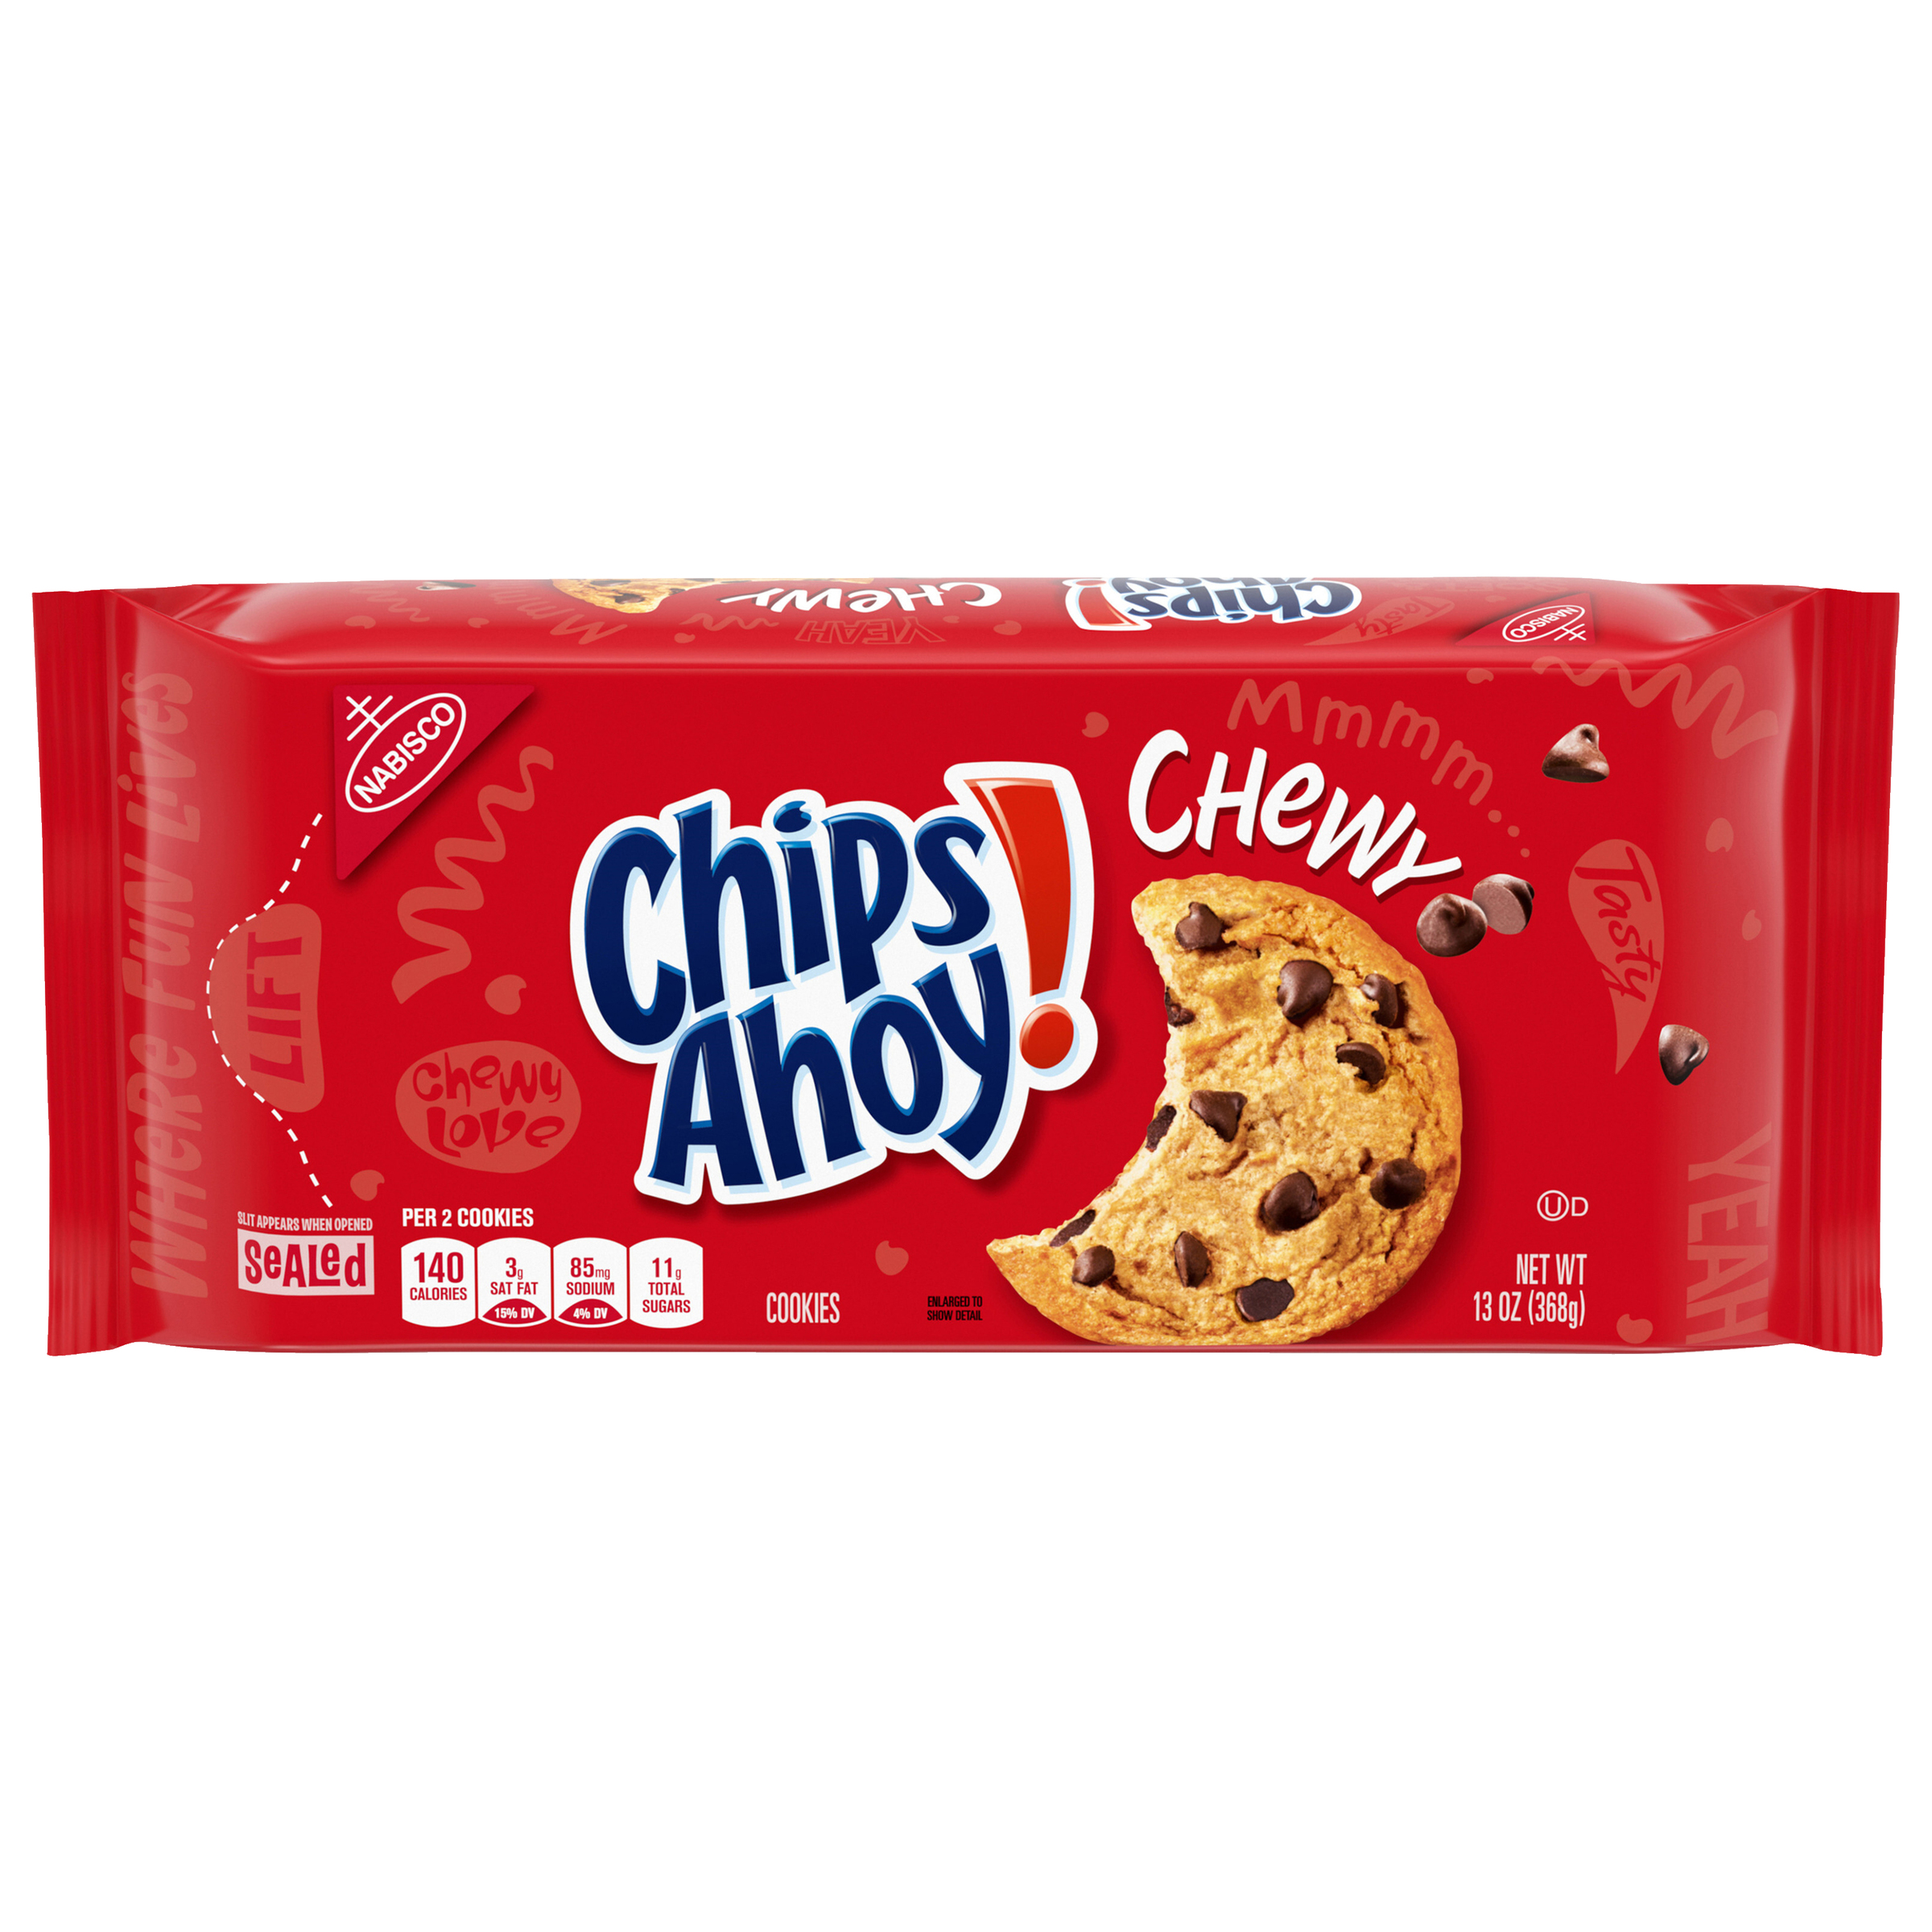 CHIPS AHOY! Chewy Chewy Cookies 13 oz